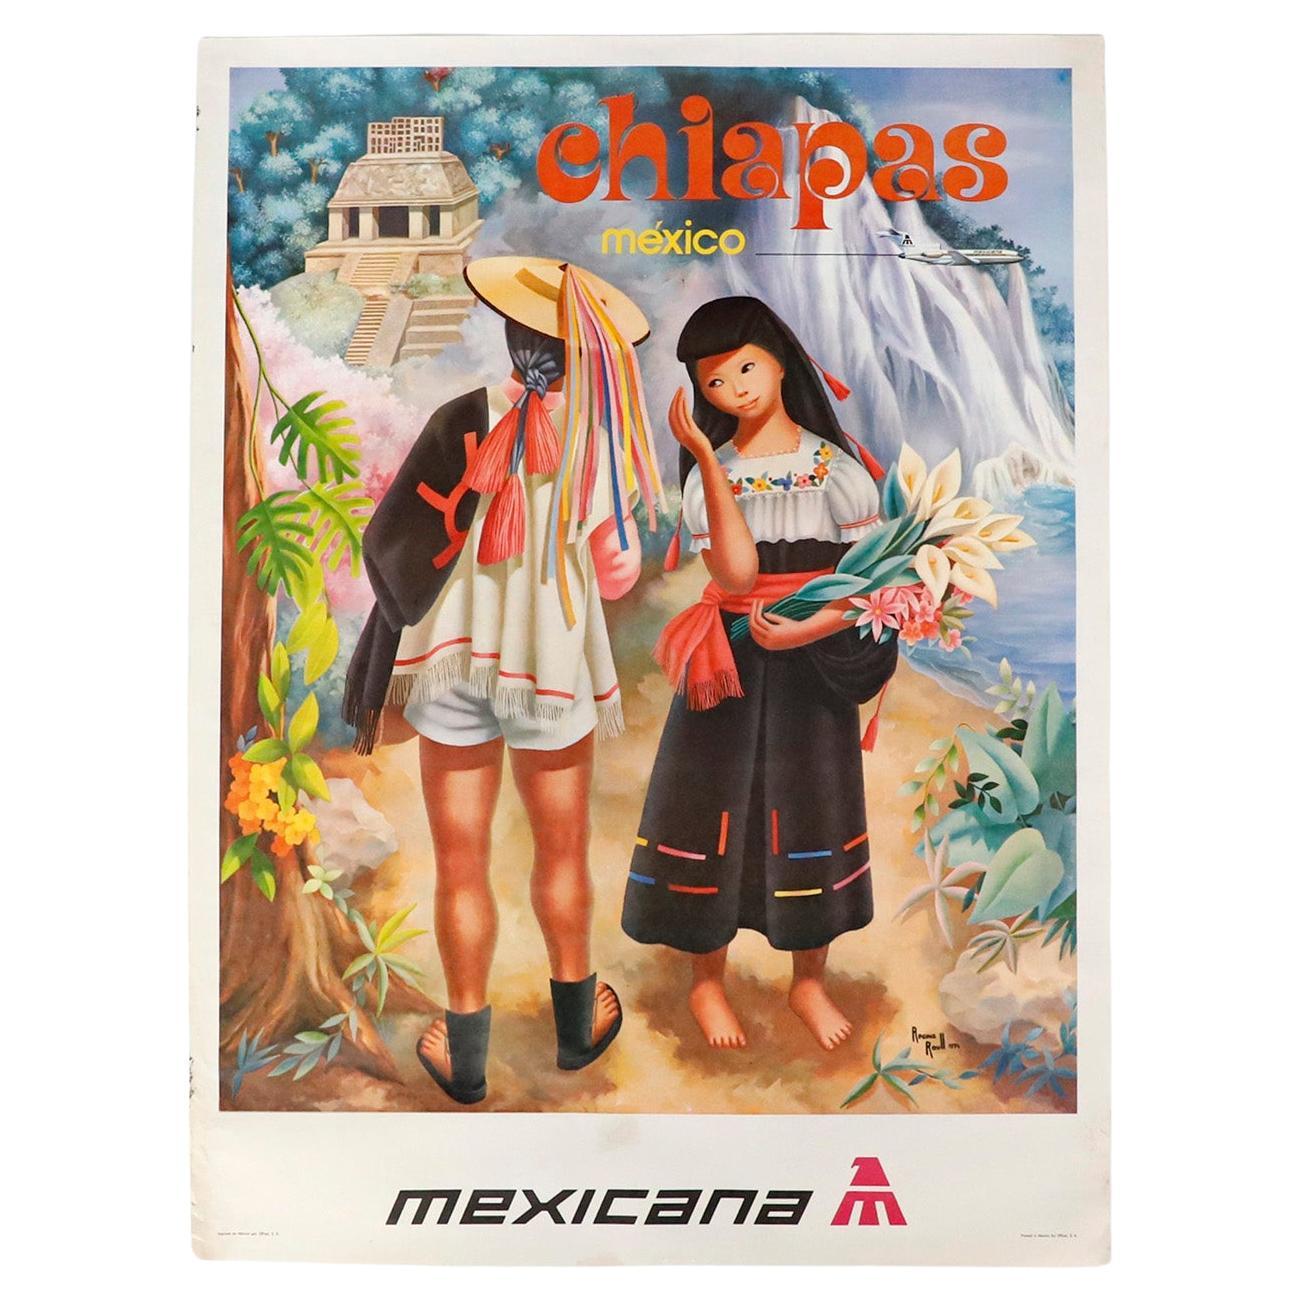 Original Chiapas, Mexicana Airlines Poster by Regina Raull For Sale